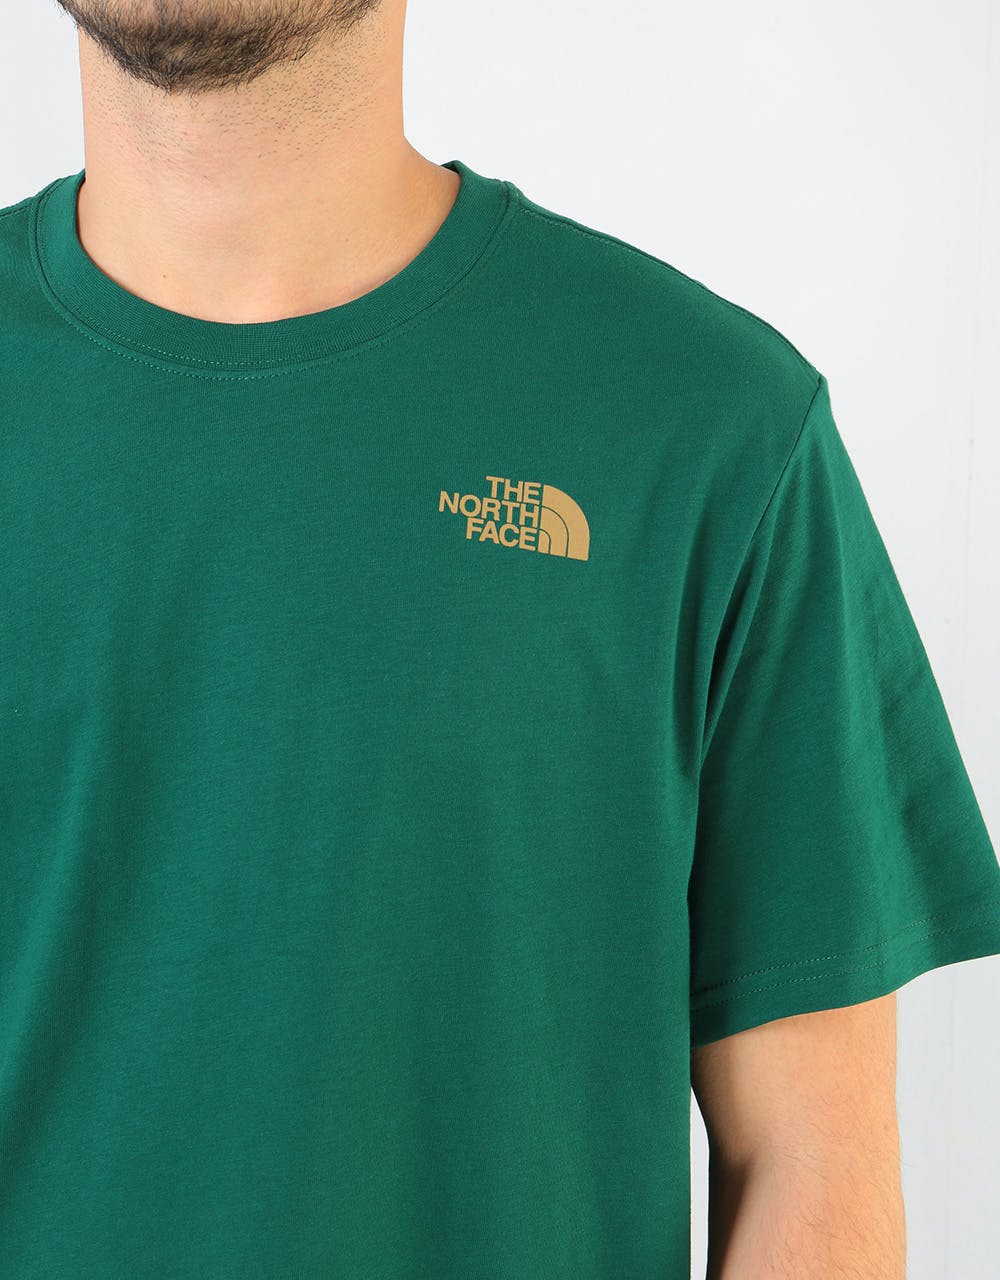 The North Face S/S Red Box T-Shirt - Night Green